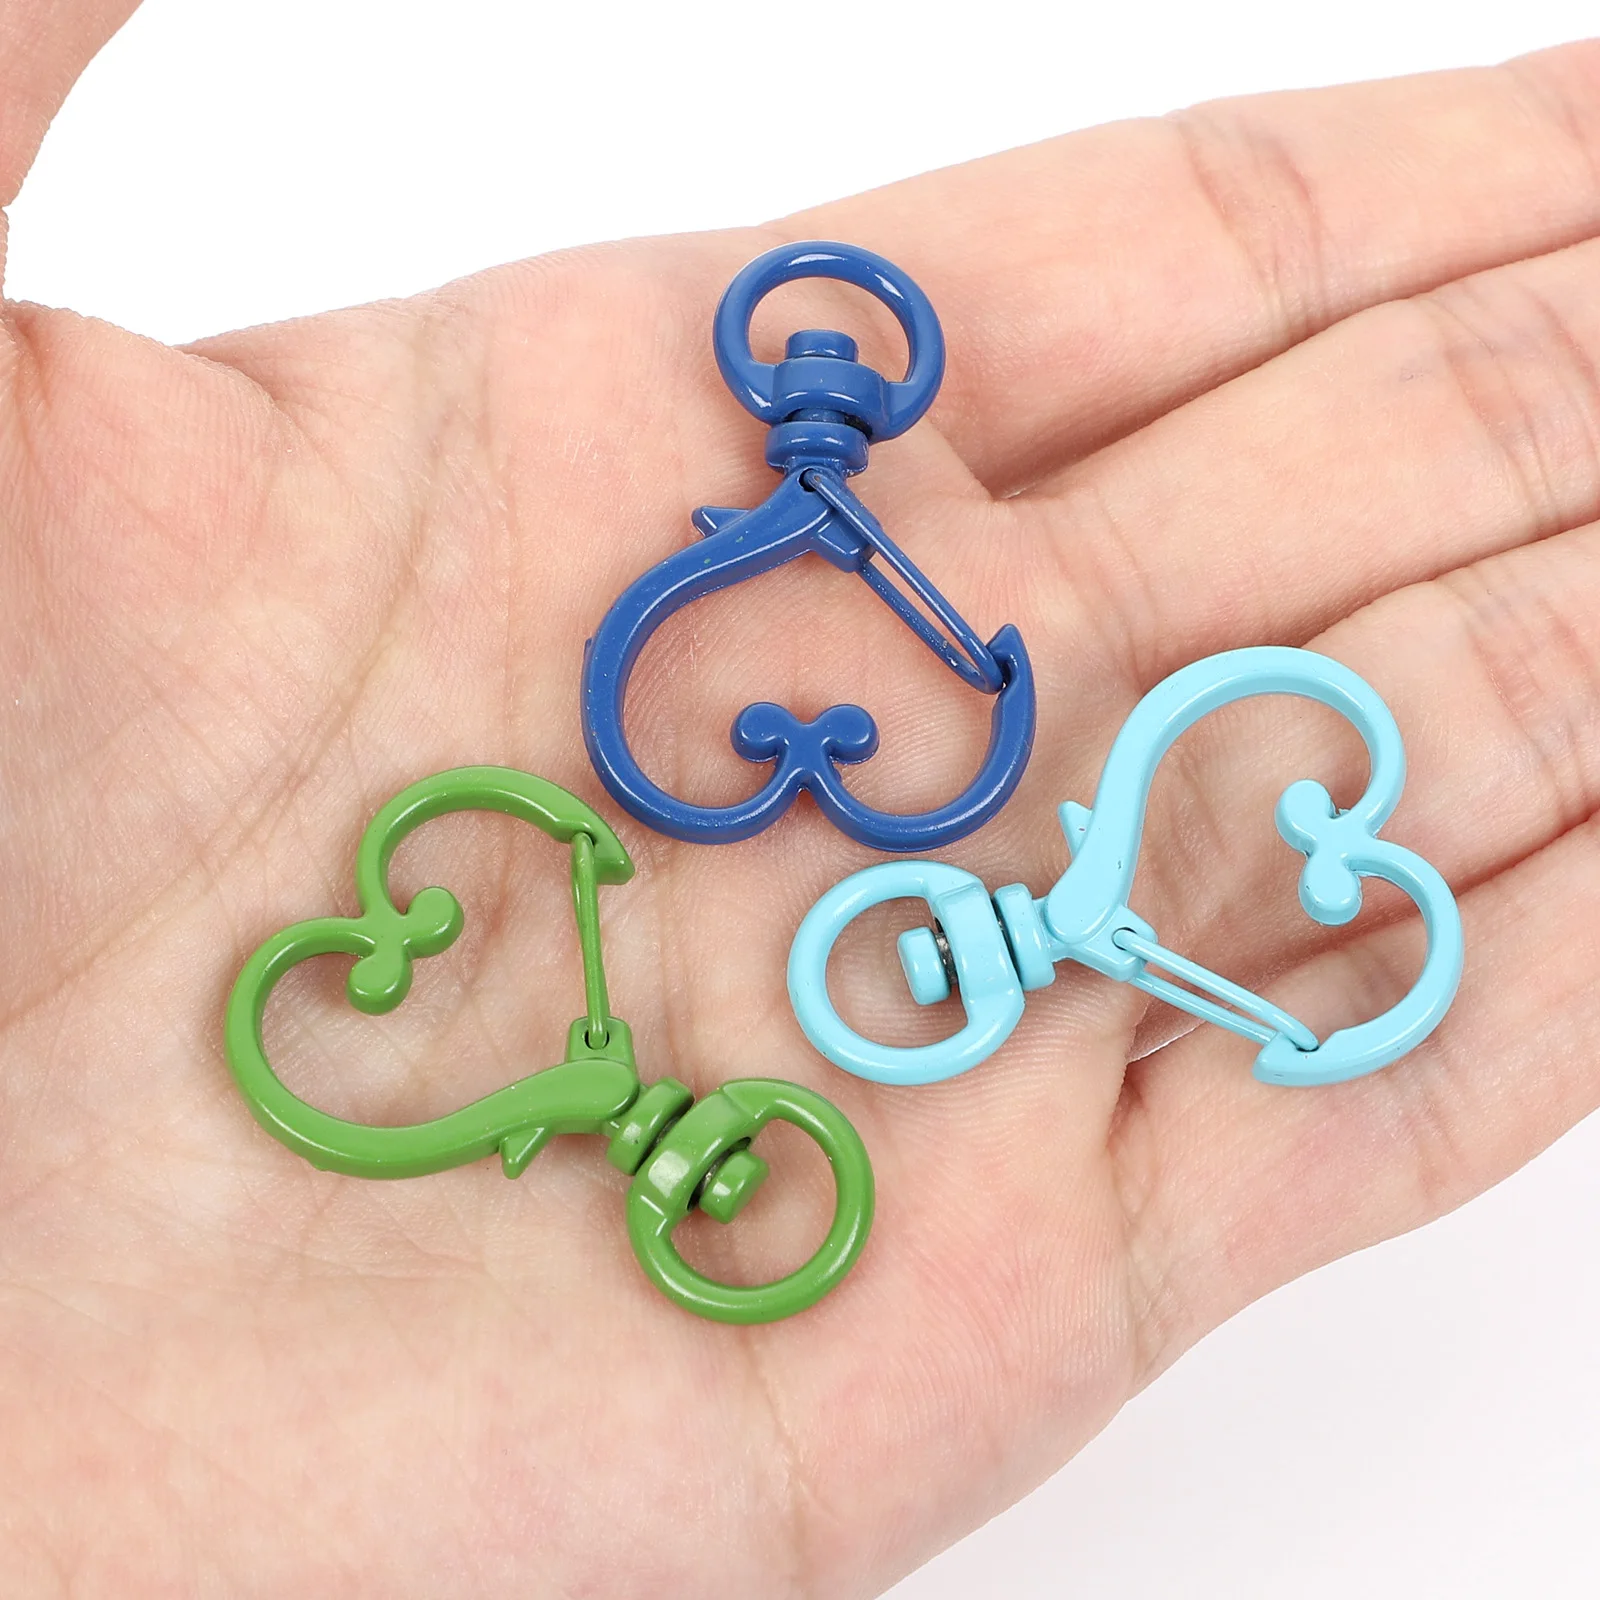 10Pcs/Lot 14 Colors Mixed Alloy Heart Shape Lobster Clasp Hook End  Connector Keychain Chain Accessories for DIY Jewelry Findigsn